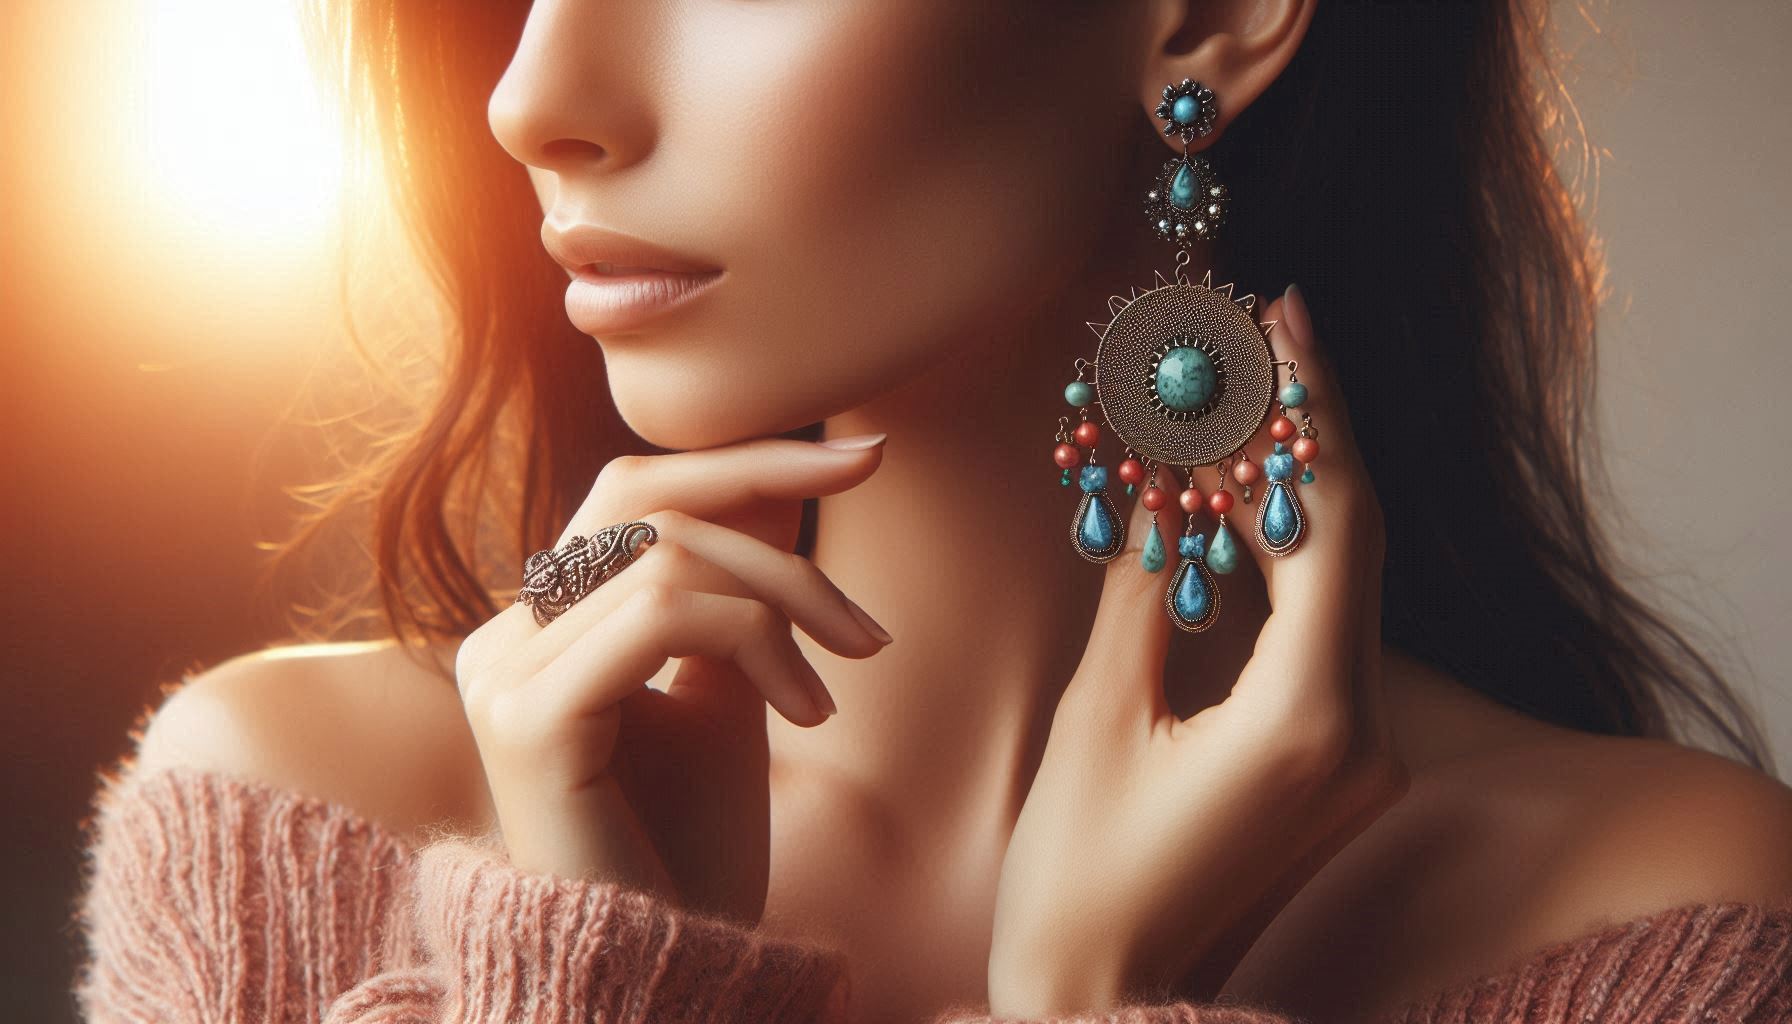 What Are Pros and Cons Of Wearing Earrings?